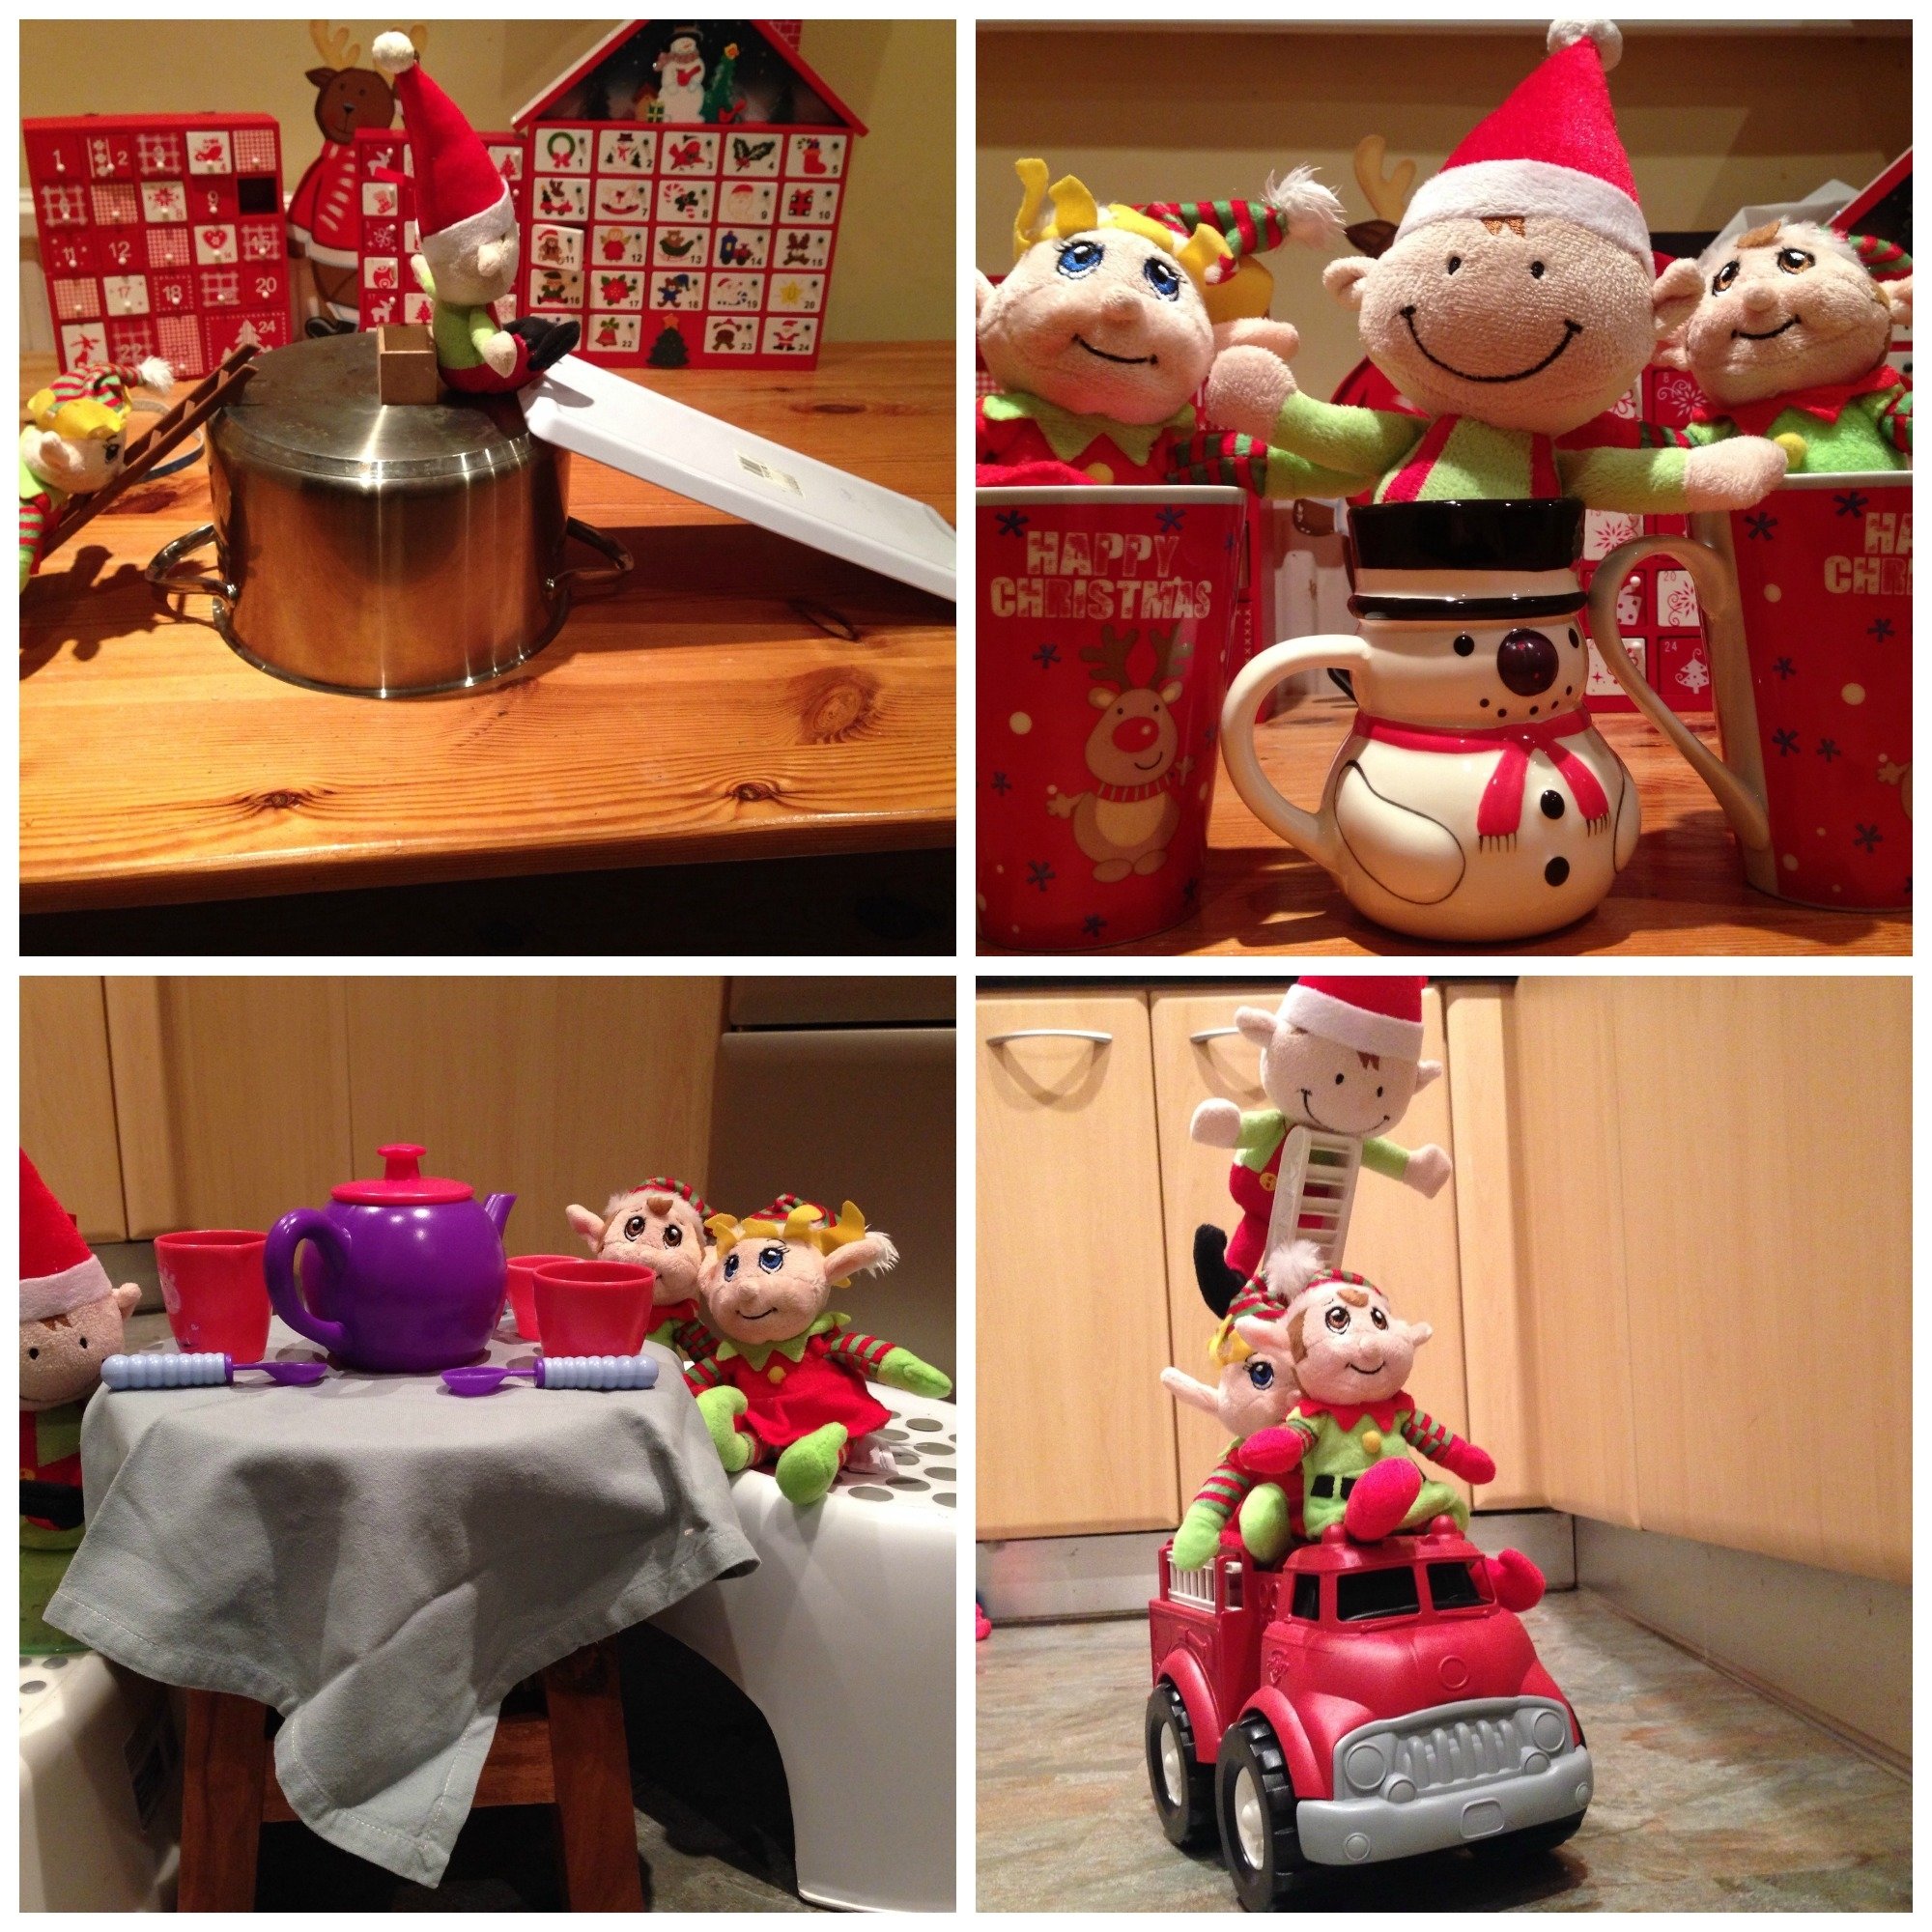 10 Lovely Ideas For Elf On The Shelf Mischief a beginners guide to elf on the shelf cardiff mummy sayscardiff 2023